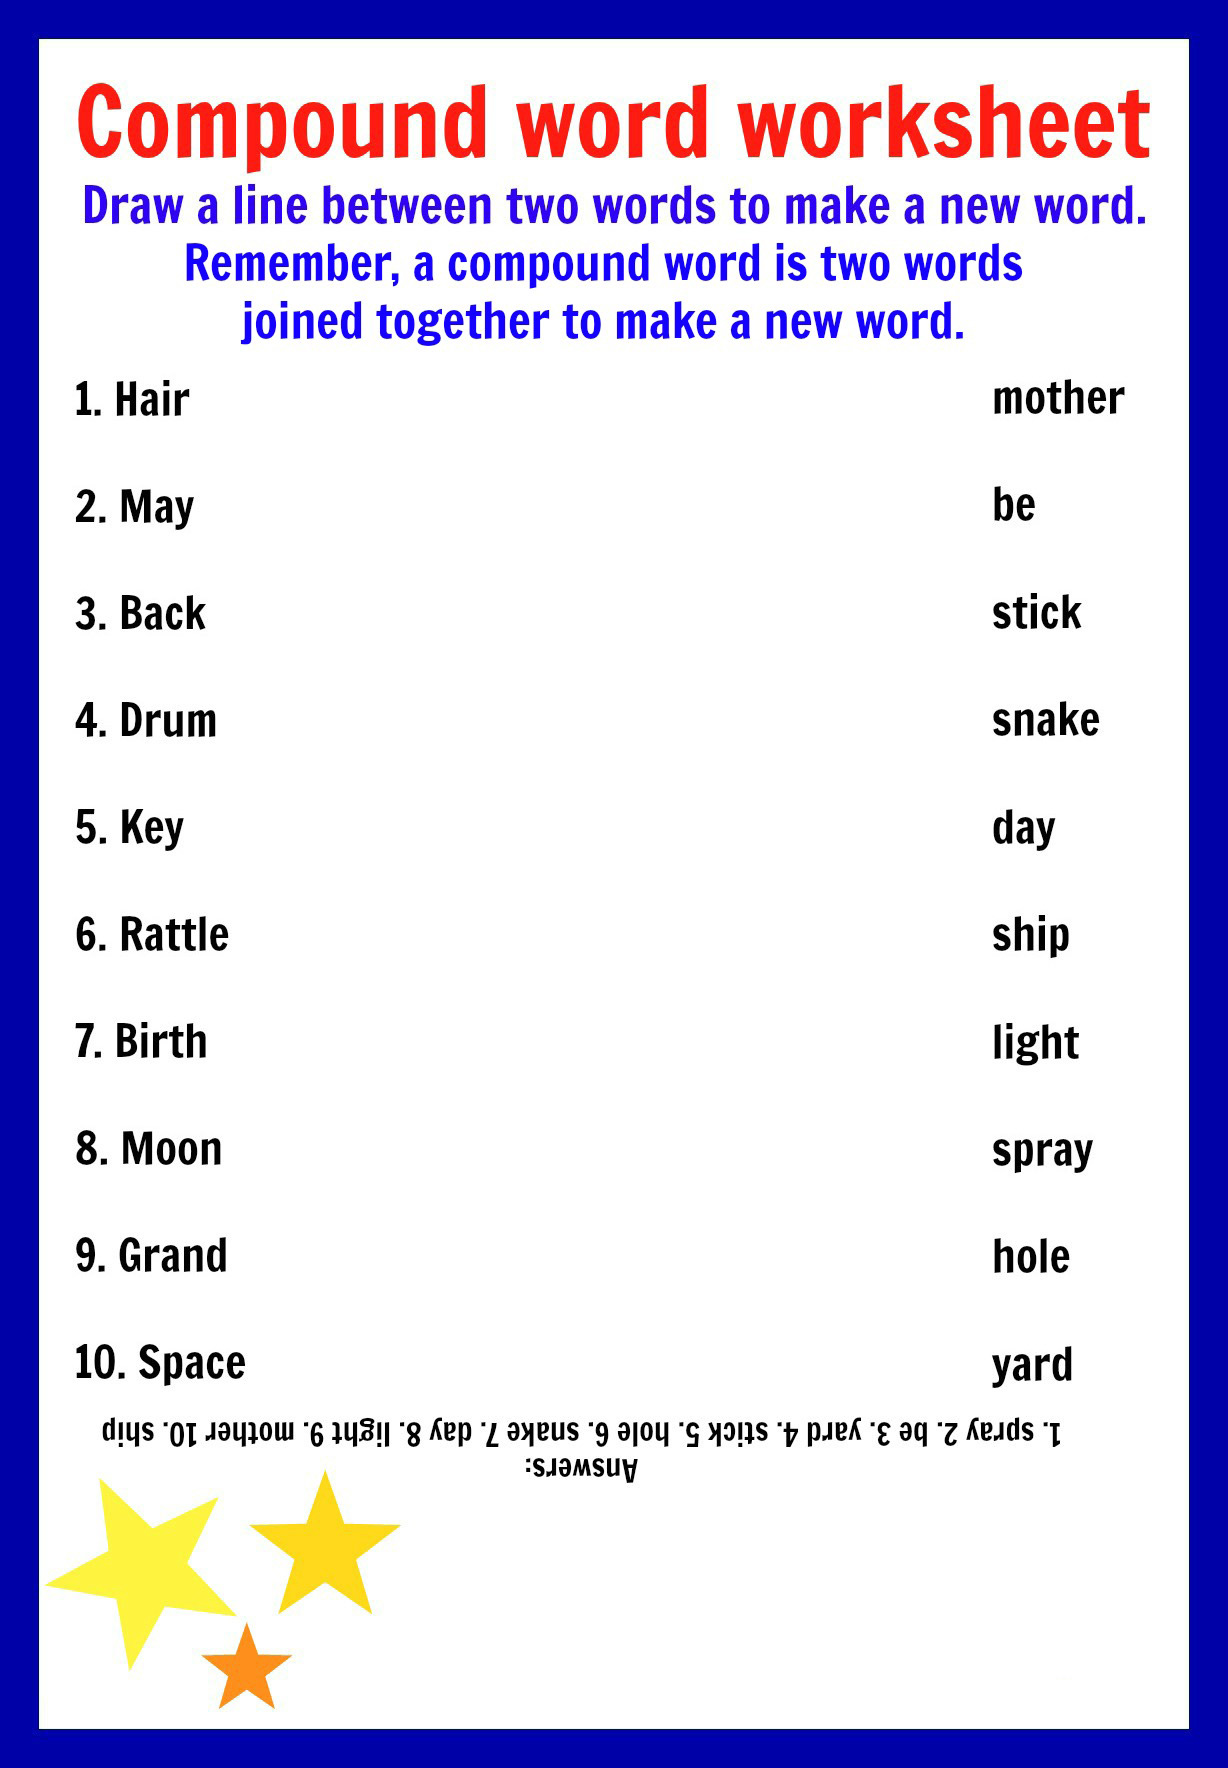 compound-nouns-interactive-and-downloadable-worksheet-check-your-answers-online-or-send-them-to